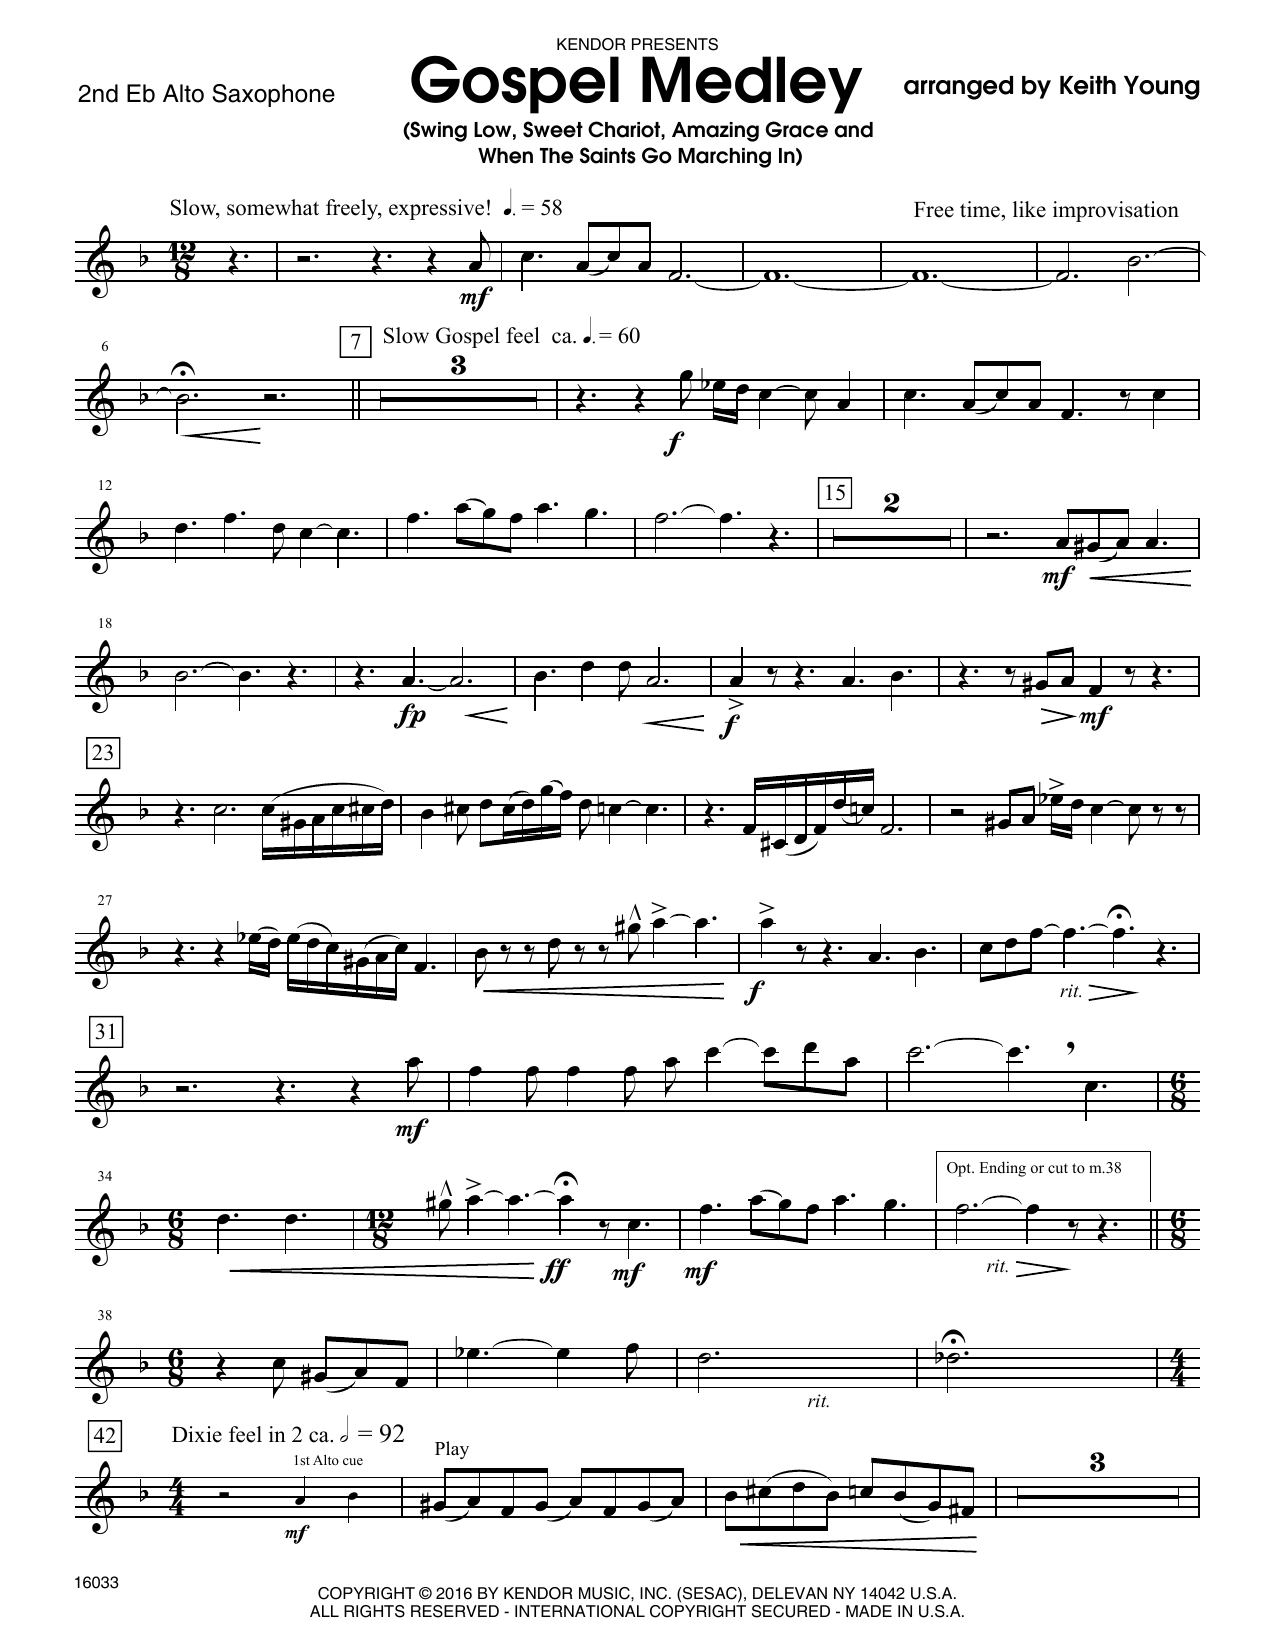 Download Keith Young Gospel Medley - 2nd Eb Alto Saxophone Sheet Music